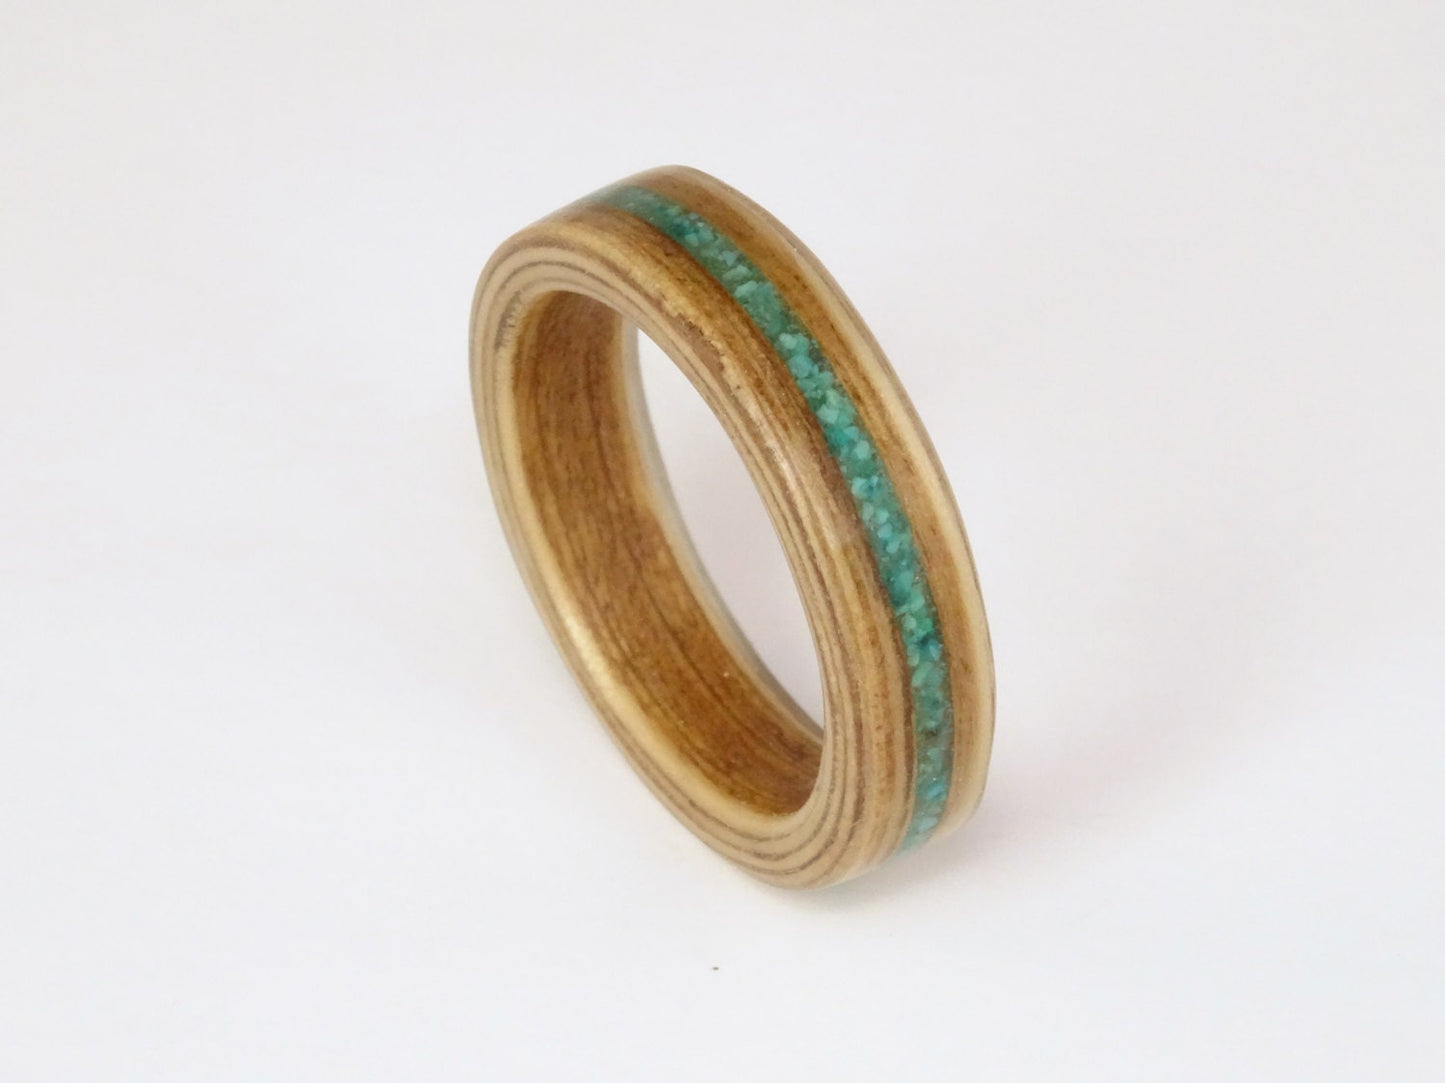 Oak Bent Wood Ring with a crushed Turquoise inlay,